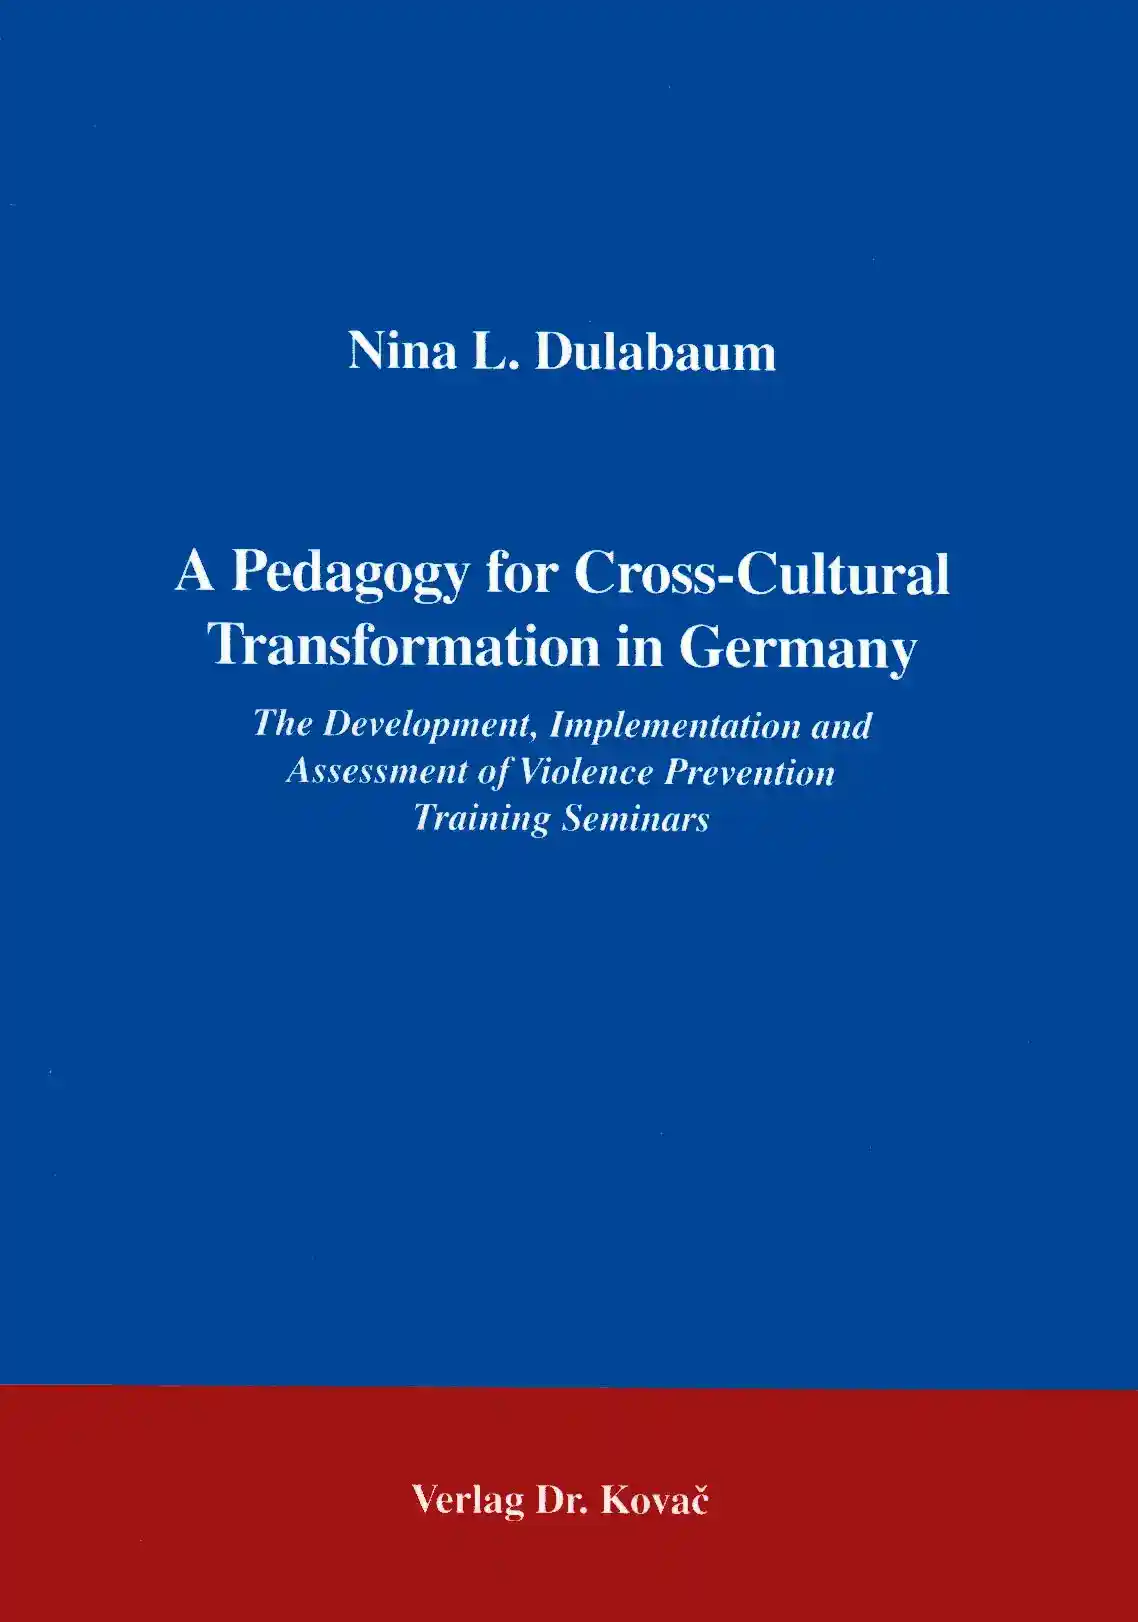 : A Pedagogy for Cross-Cultural Transformation in Germany